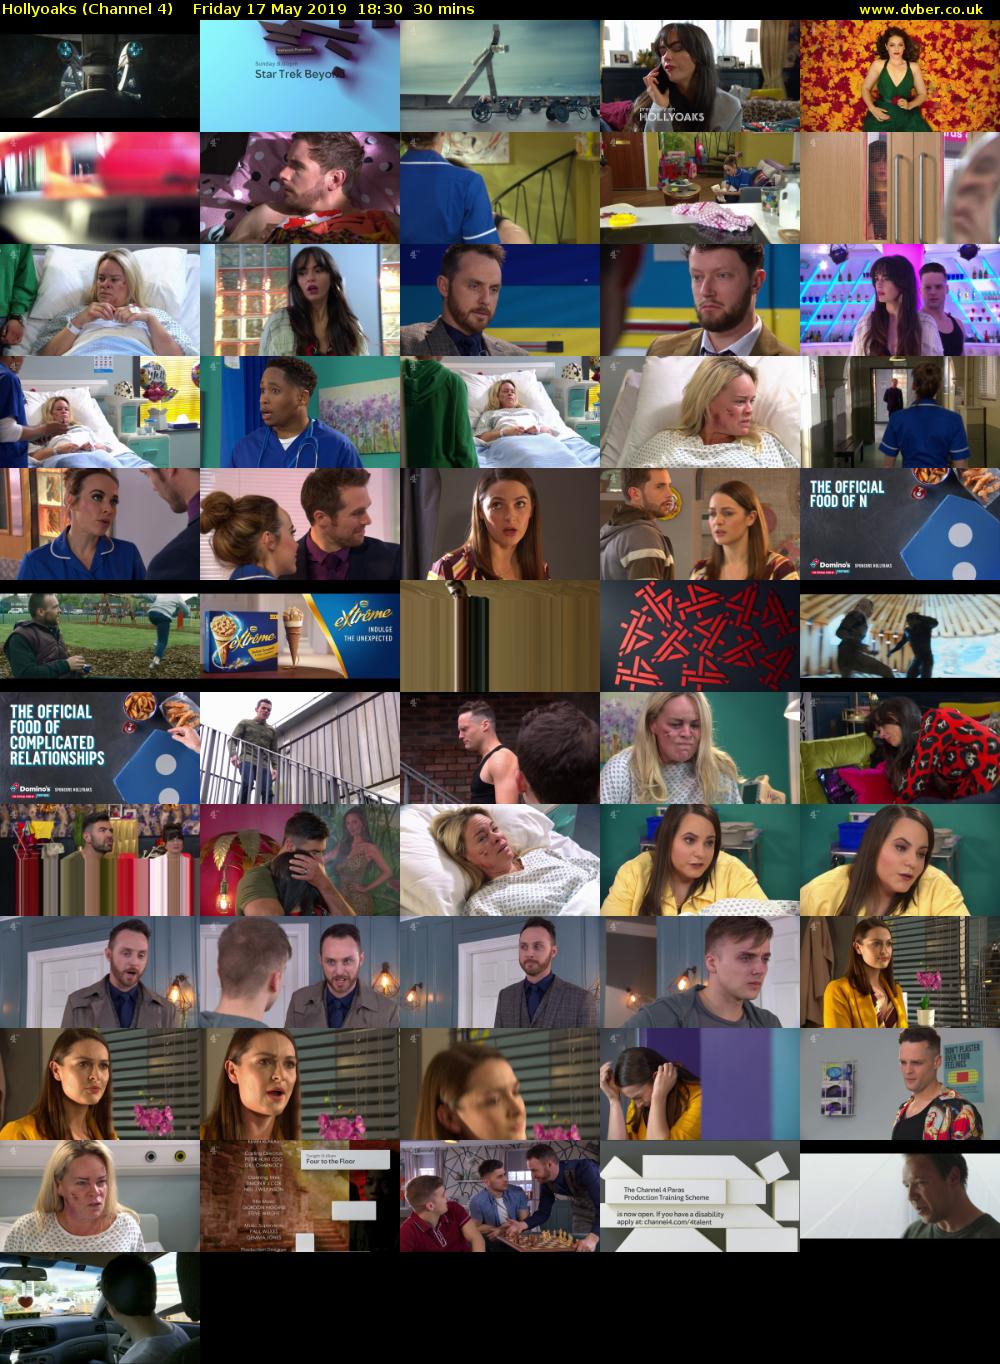 Hollyoaks (Channel 4) Friday 17 May 2019 18:30 - 19:00